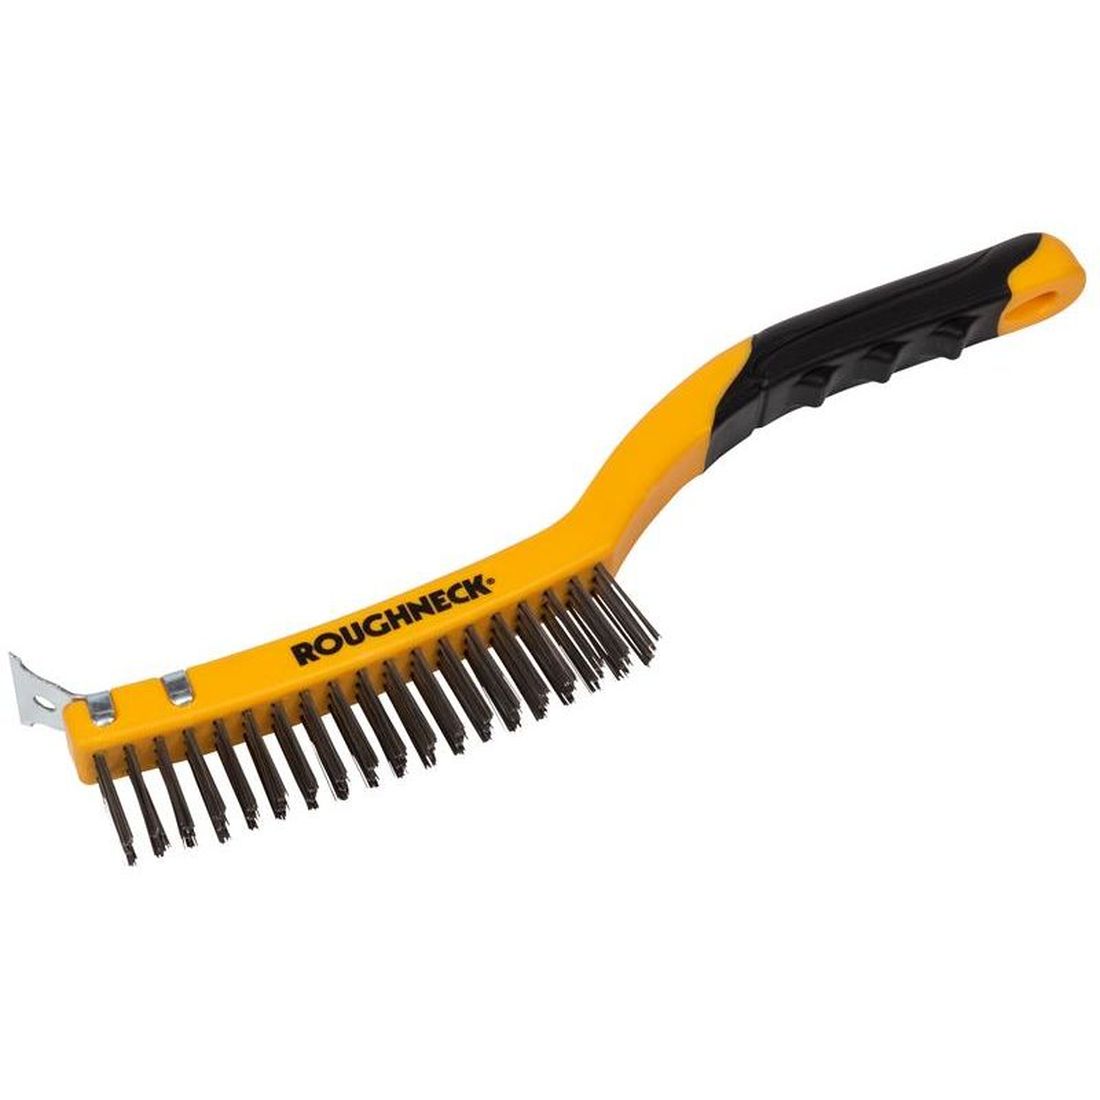 Roughneck Stainless Steel Wire Brush Soft Grip with Scraper 355mm (14in) - 3 Row          